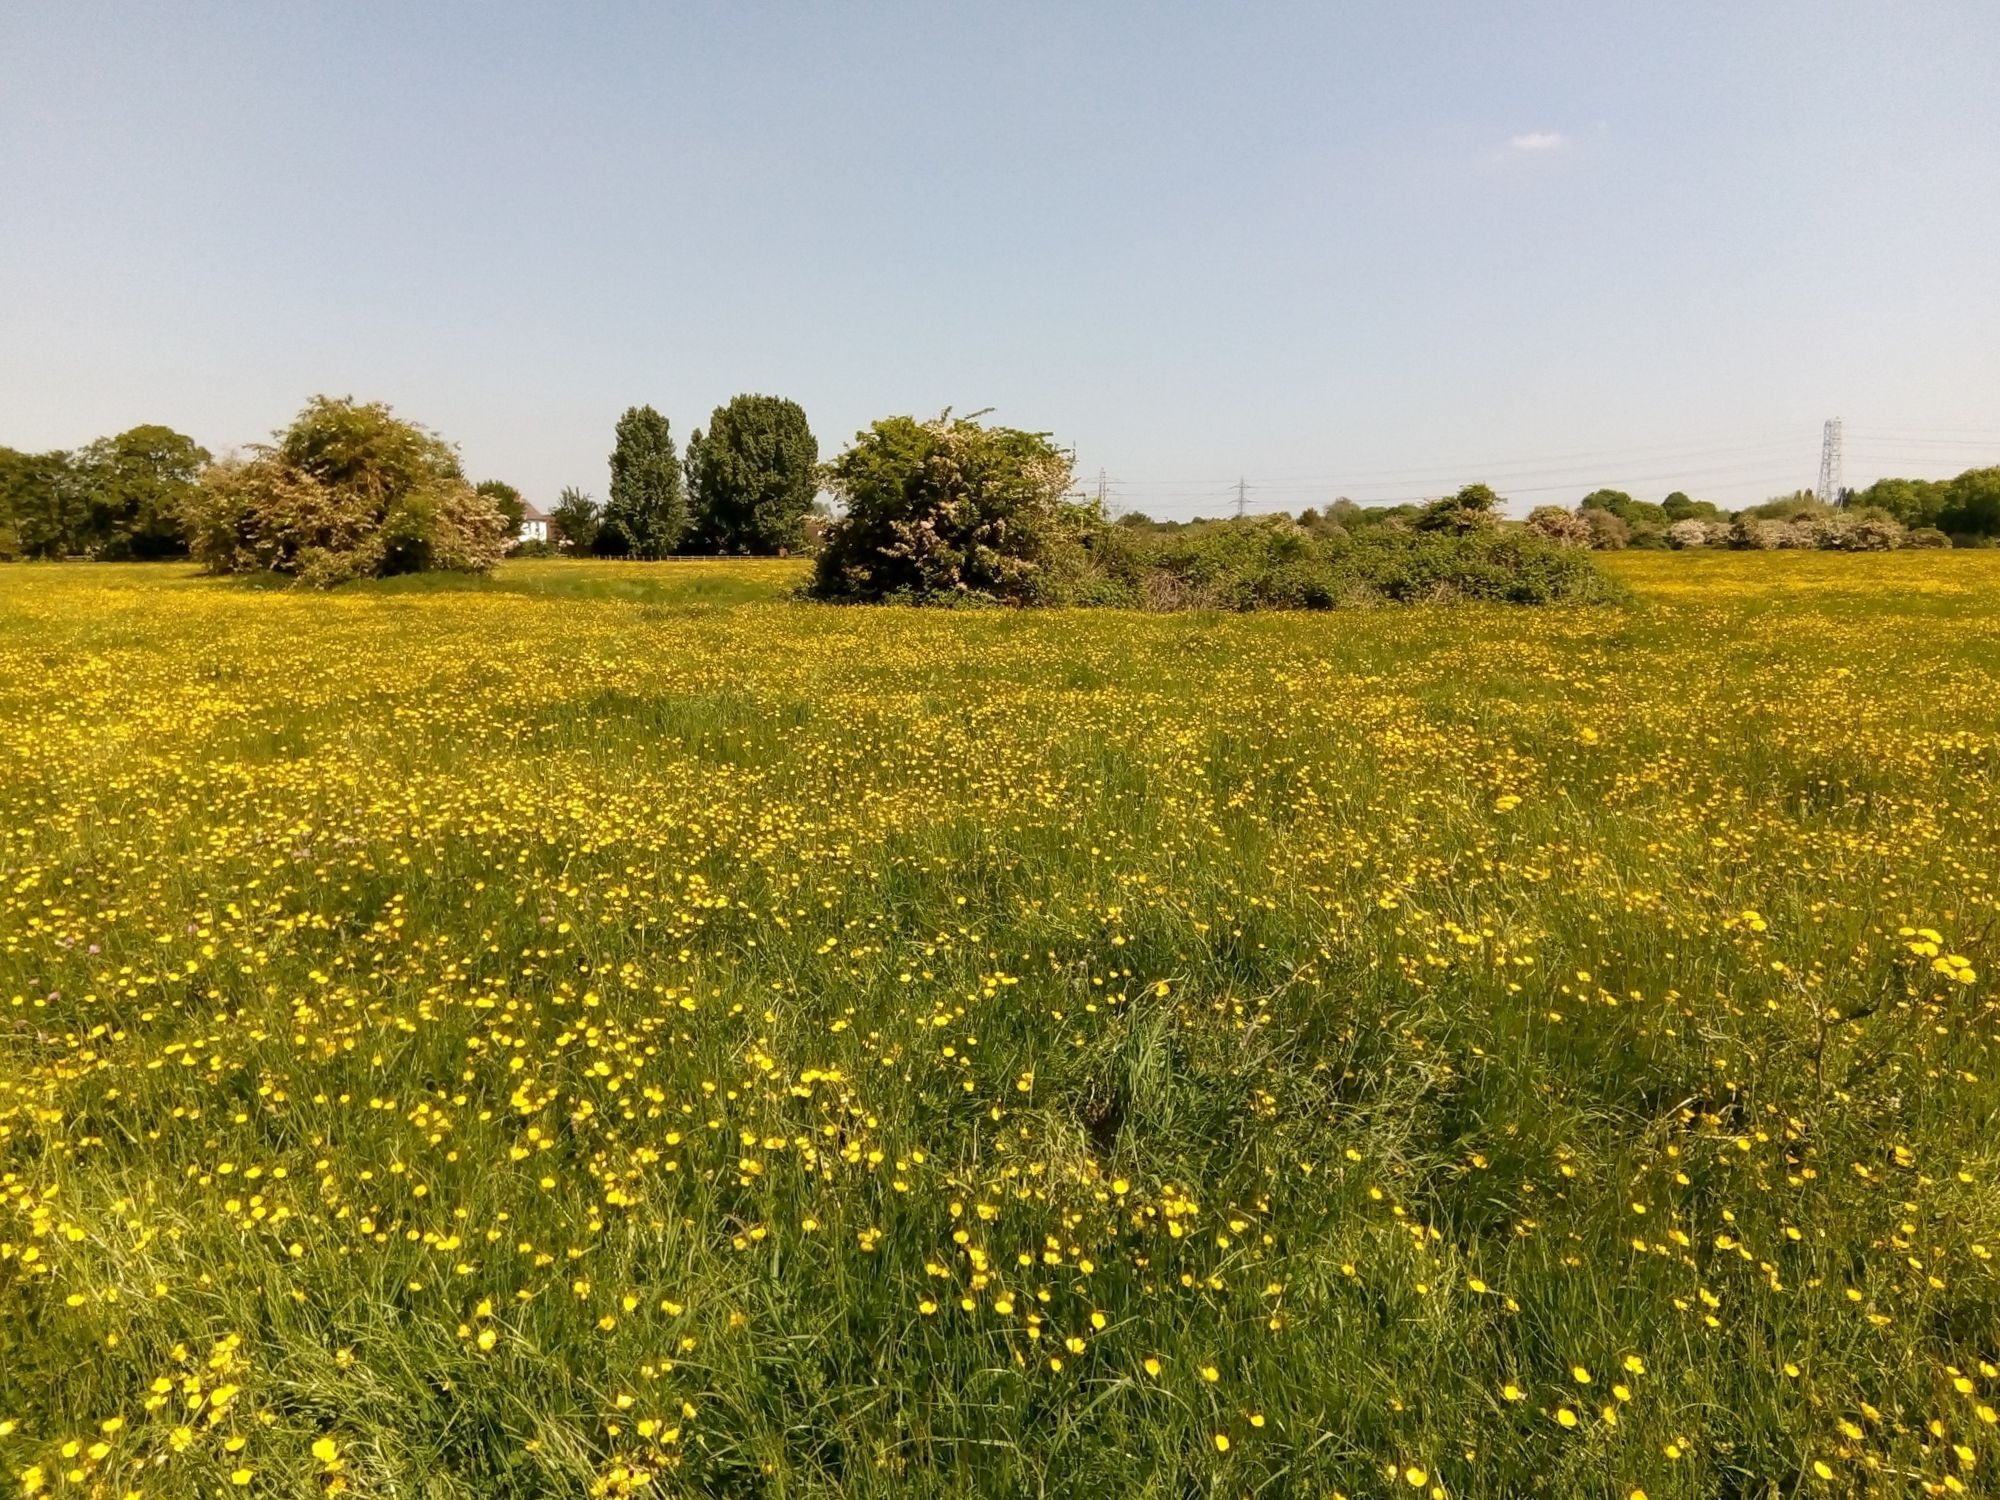 Looking over Dumsey Meadow near Chertsey on a sunny spring day. Bushes are in blossom and the meadow is filled with buttercups.